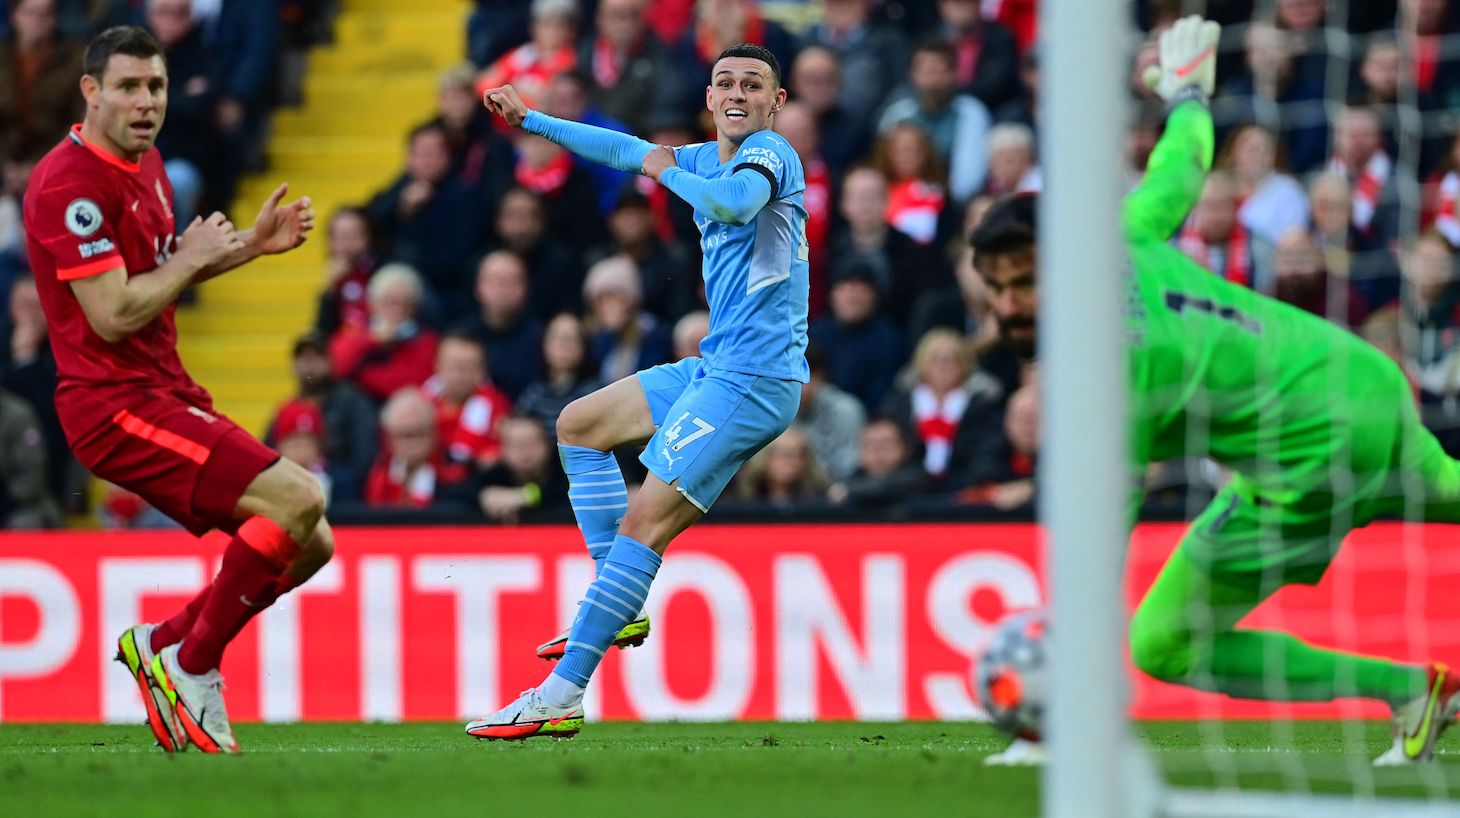 Manchester City's English midfielder Phil Foden (C) scores his team's equalisier during the English Premier League football match between Liverpool and Manchester City at Anfield in Liverpool, northwest England, on October 3, 2021.